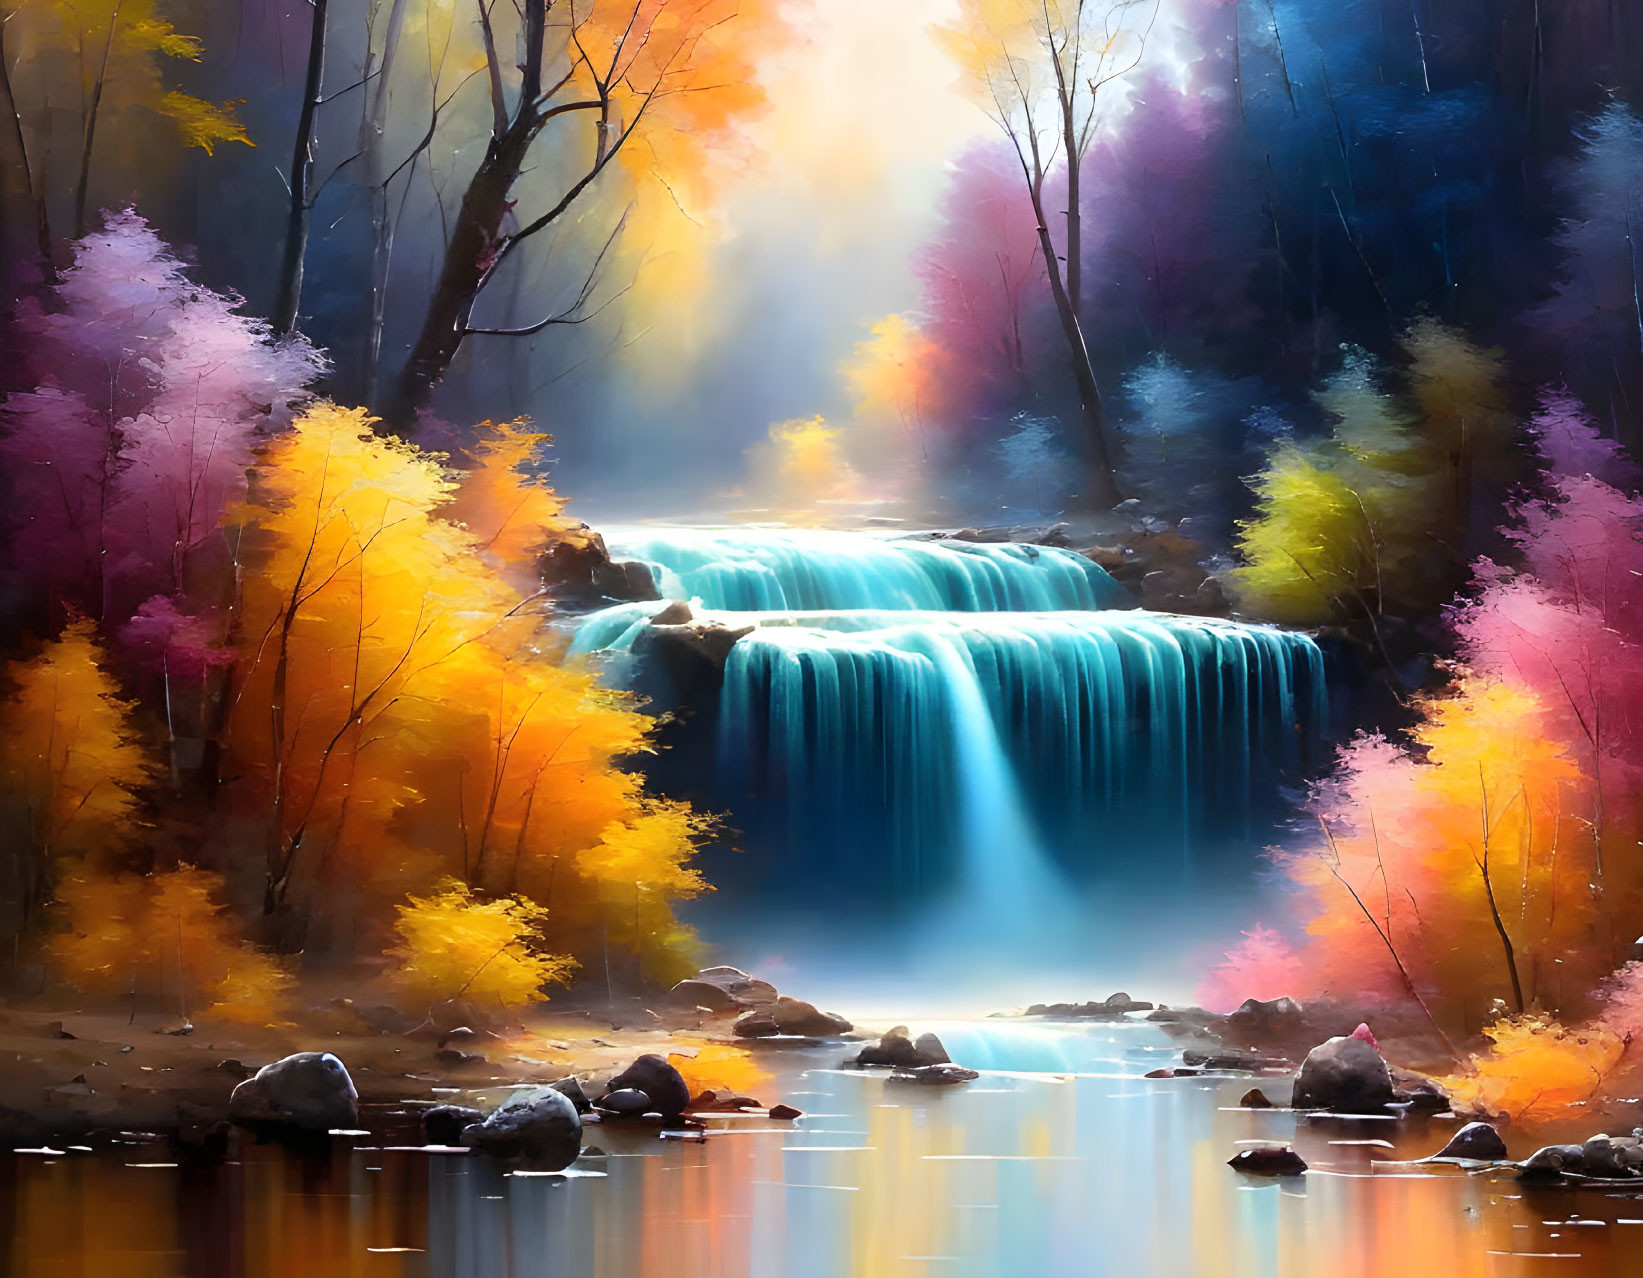 Colorful Forest Scene: Waterfall, Autumn Trees, Serene River